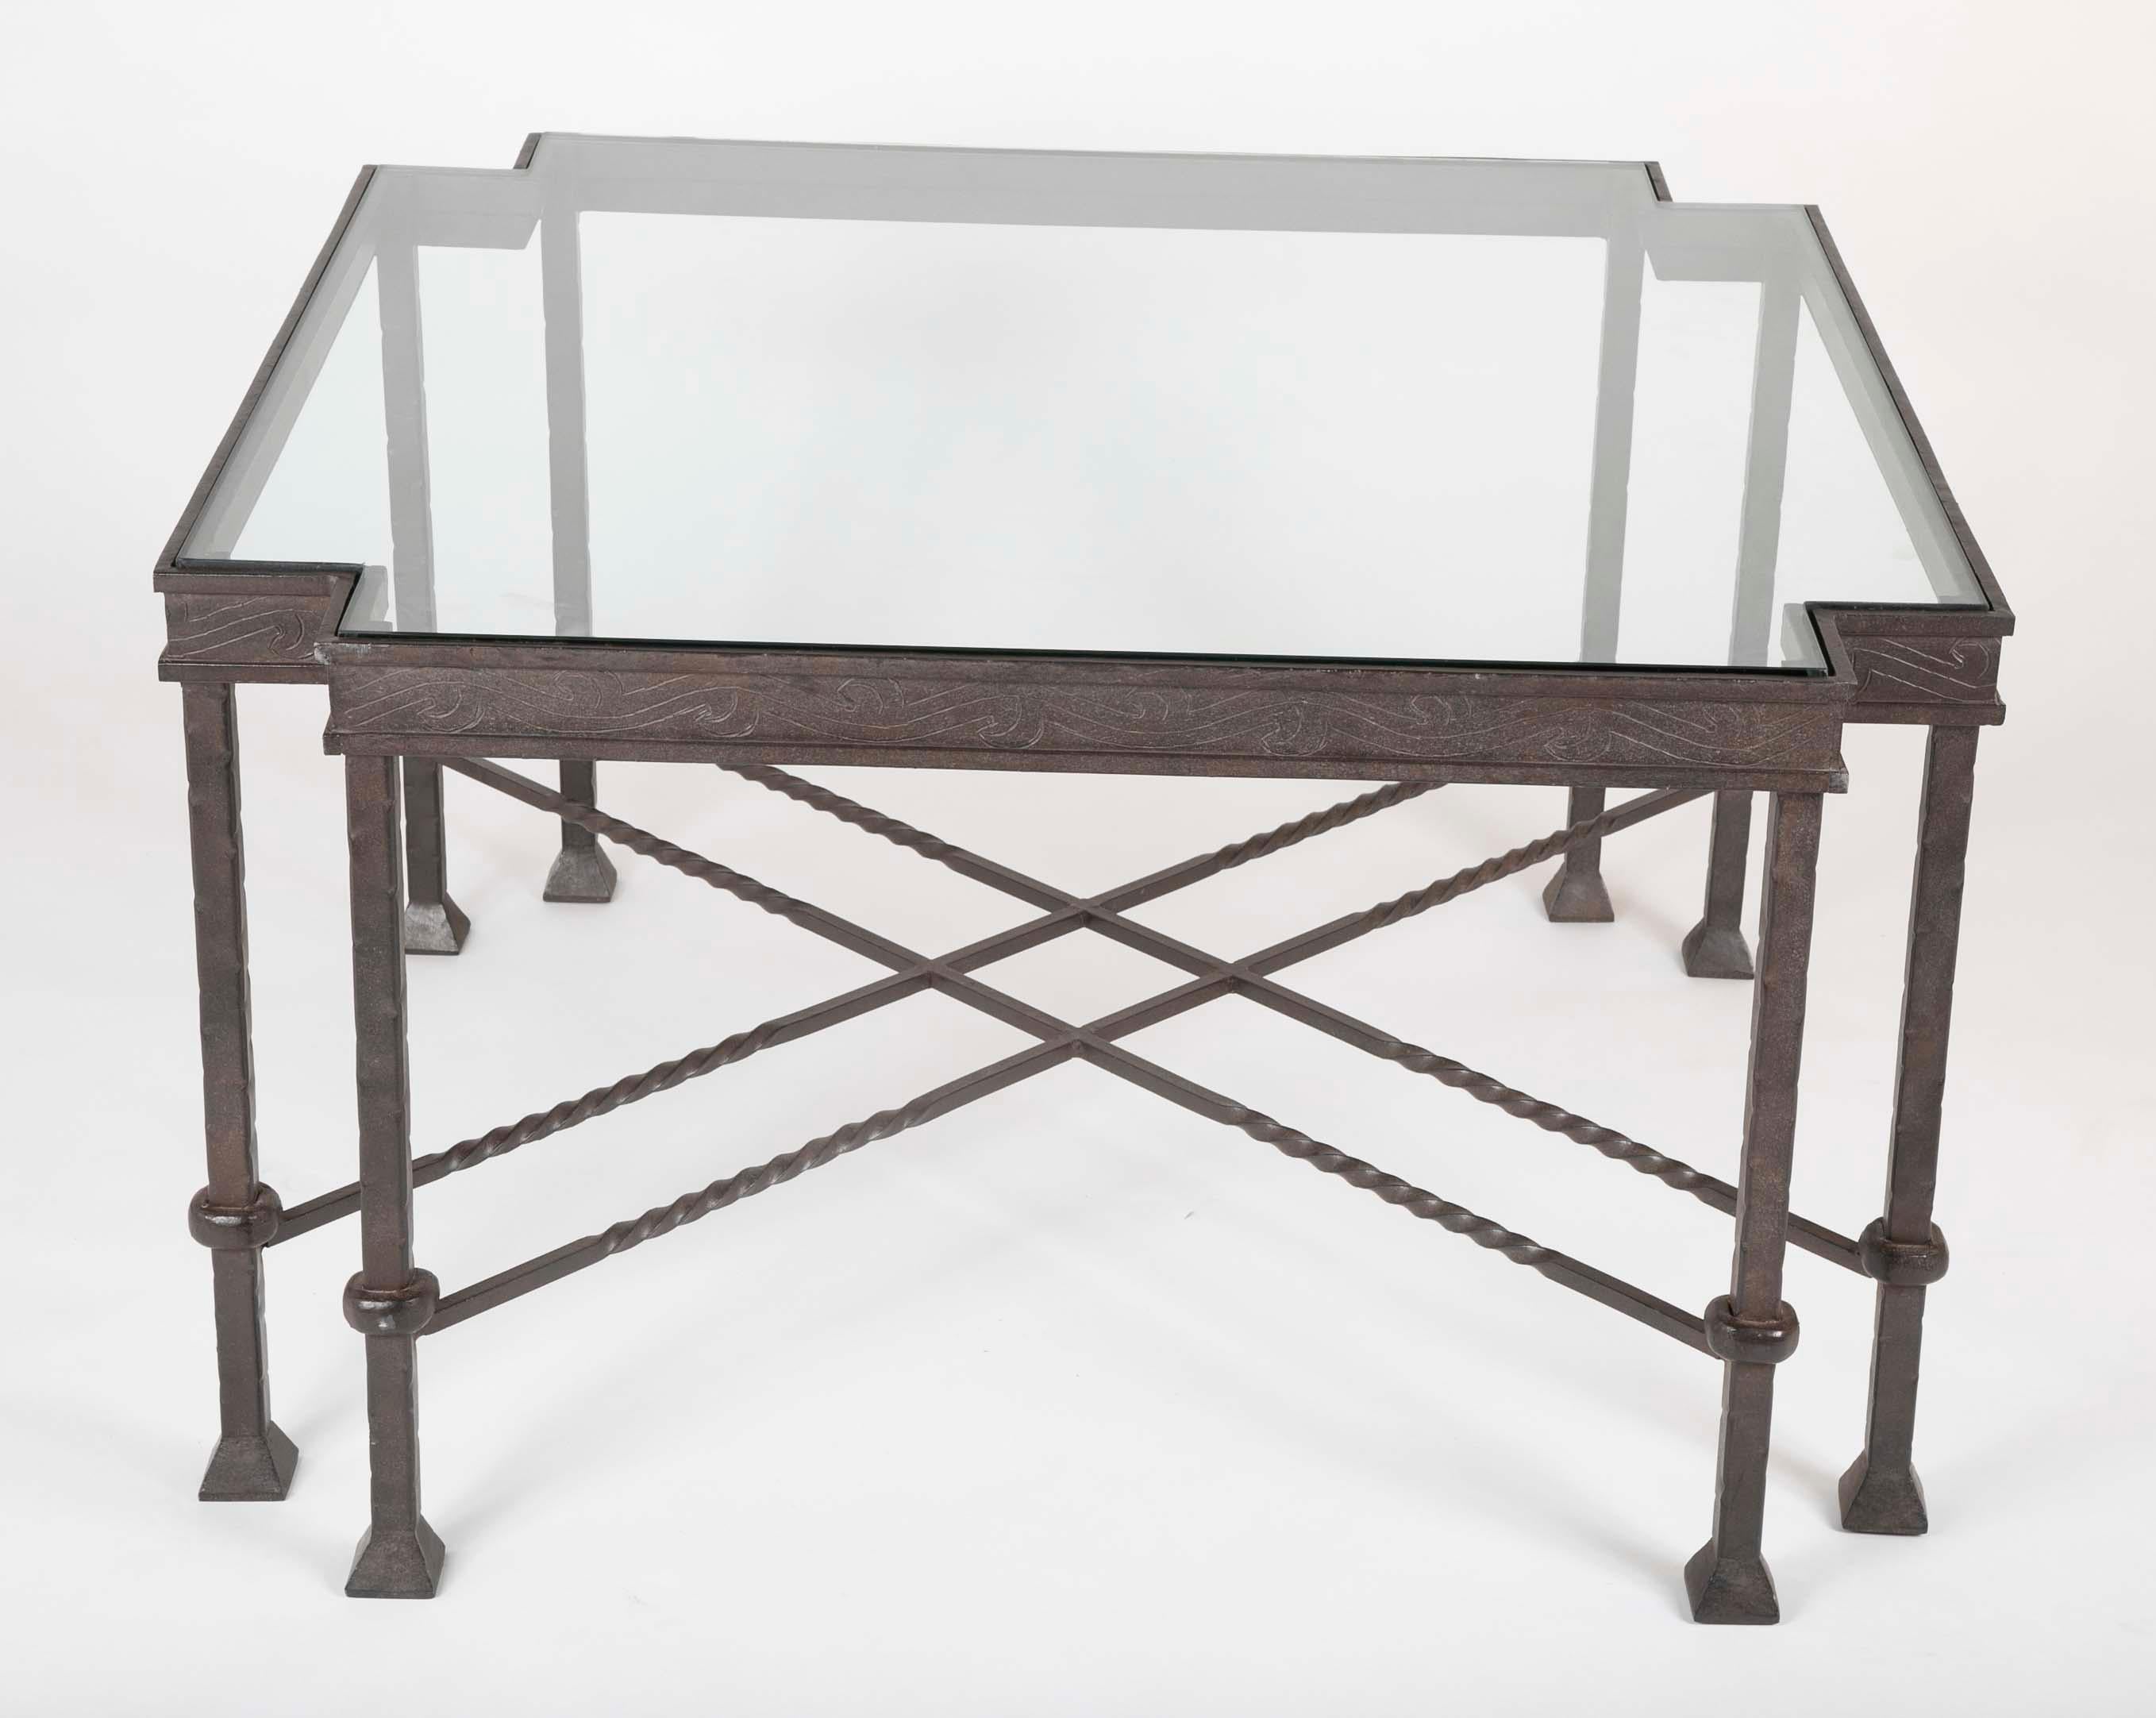 A very cool Diego Giacometti influenced wrought iron side or coffee table of unusual form, the cut corners with paired legs joined by double stretchers. The glass top framed buy a frieze with etched decoration. This geometric table, with its eight